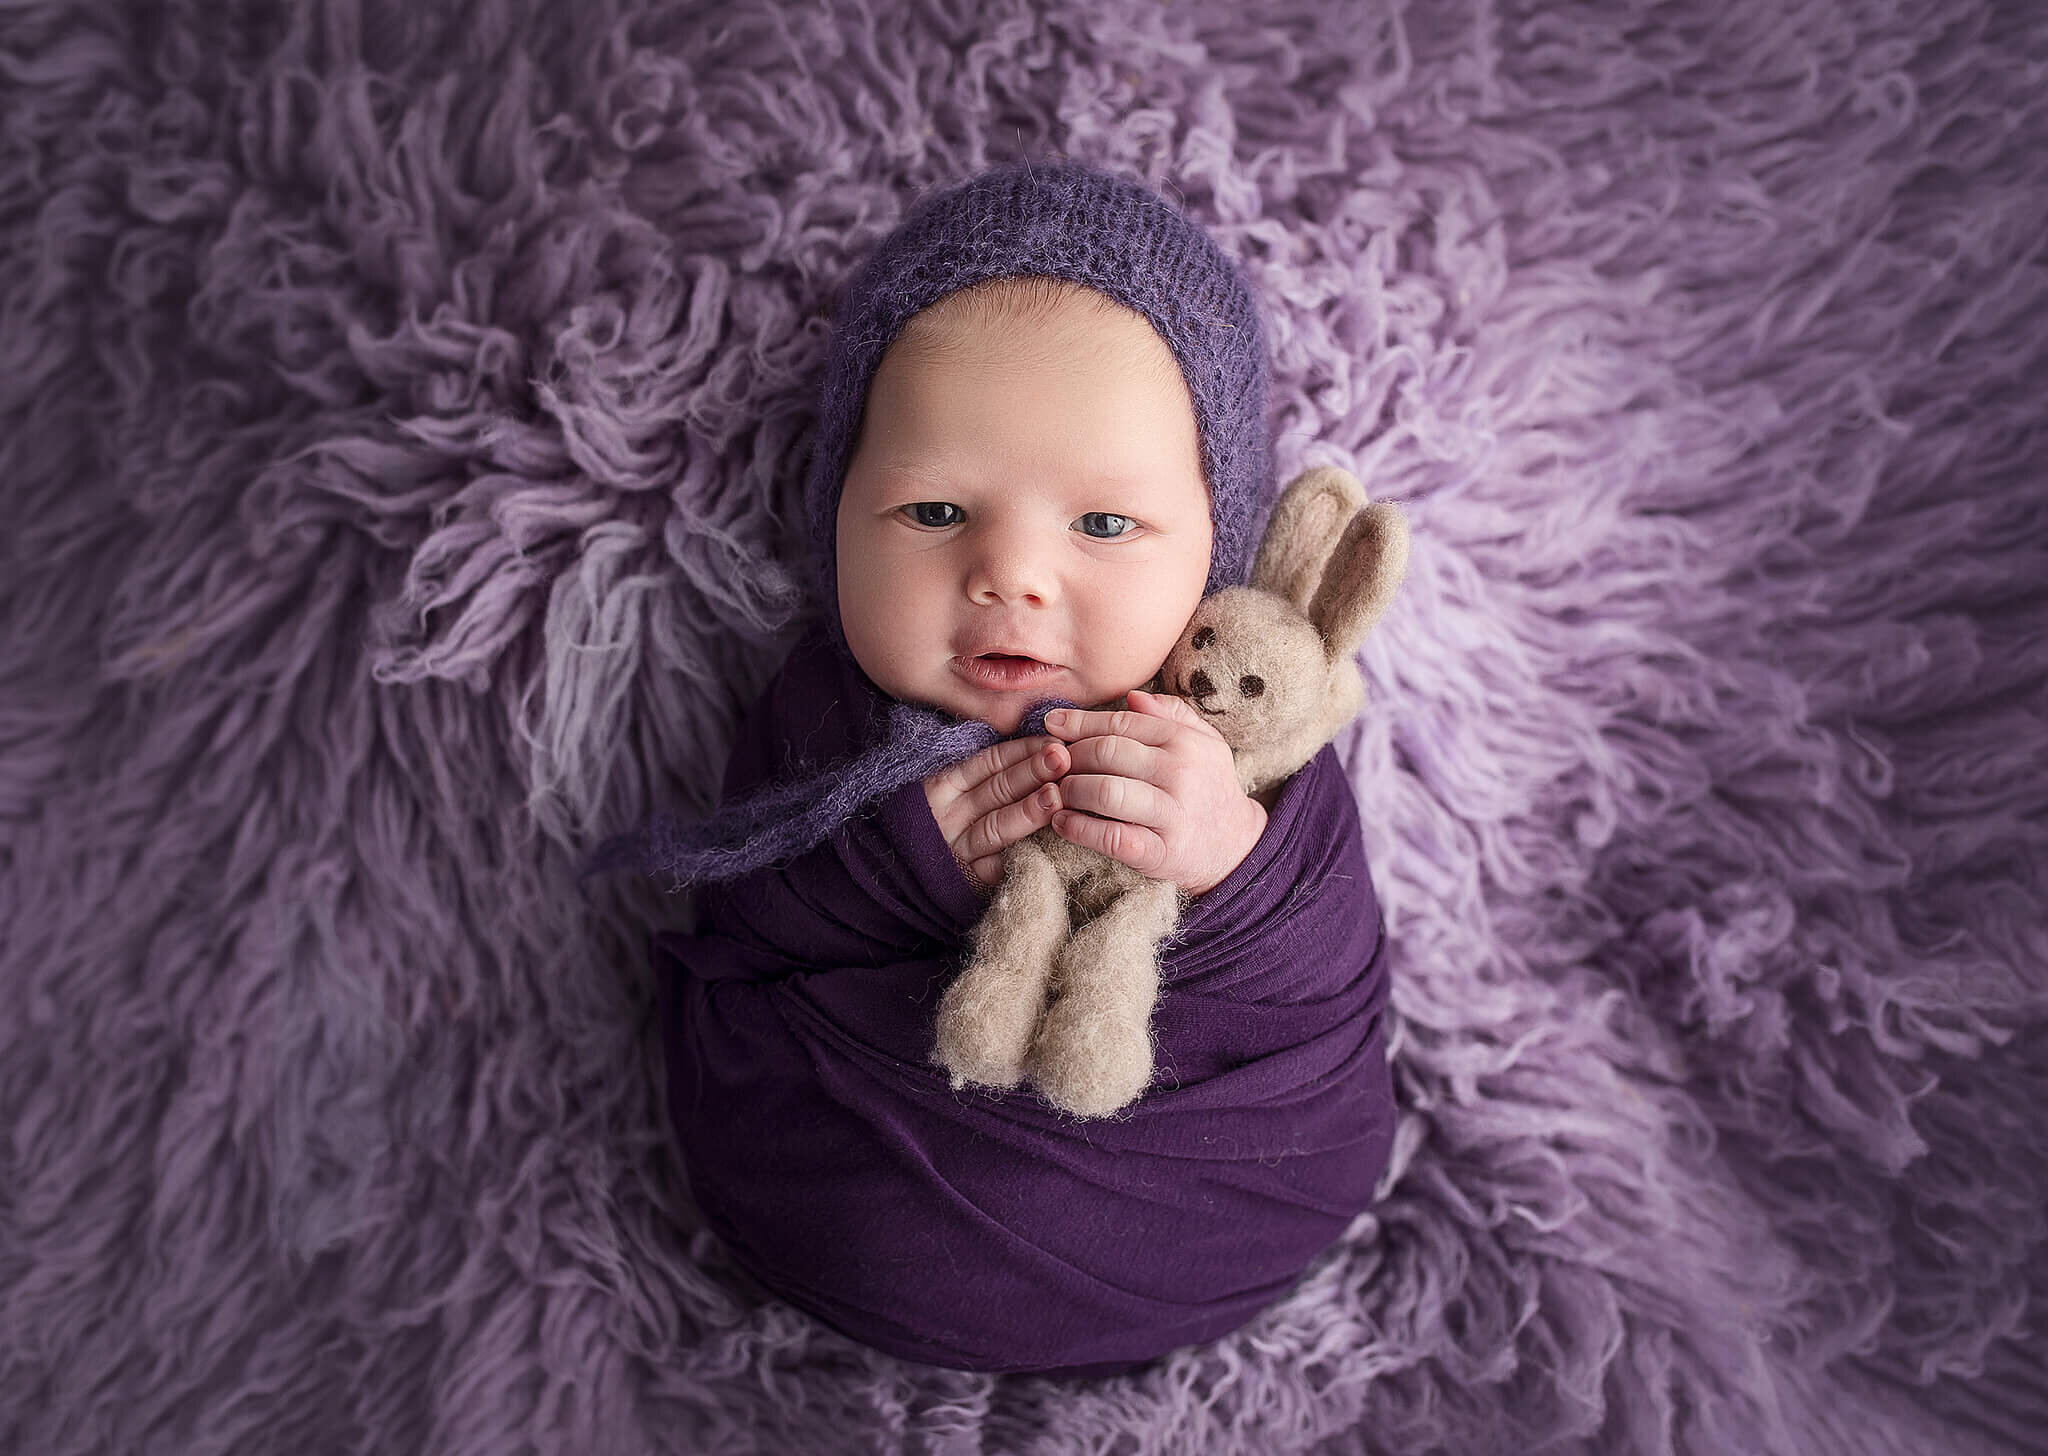 newborn girl wrapped in purple, with a purple hat and laying on a puprle flokoti rug while snuggling with a little bunny lovey